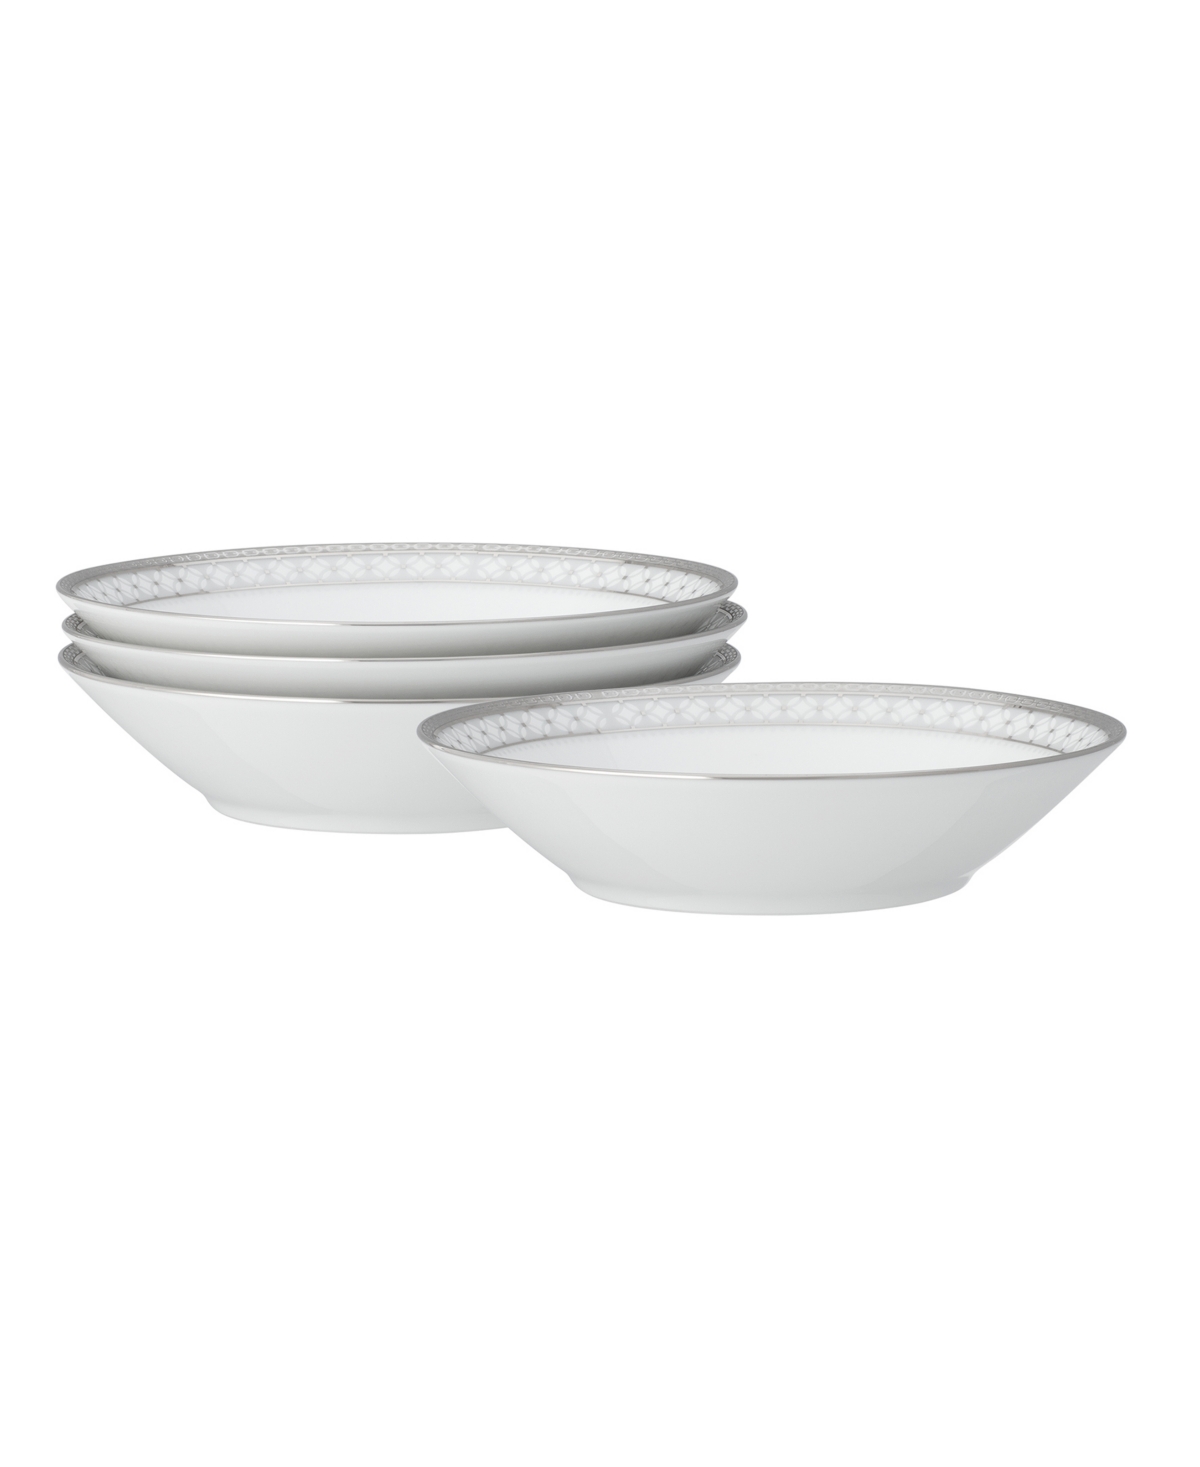 Noritake Rochester Platinum Set Of 4 Fruit Bowls, Service For 4 In White